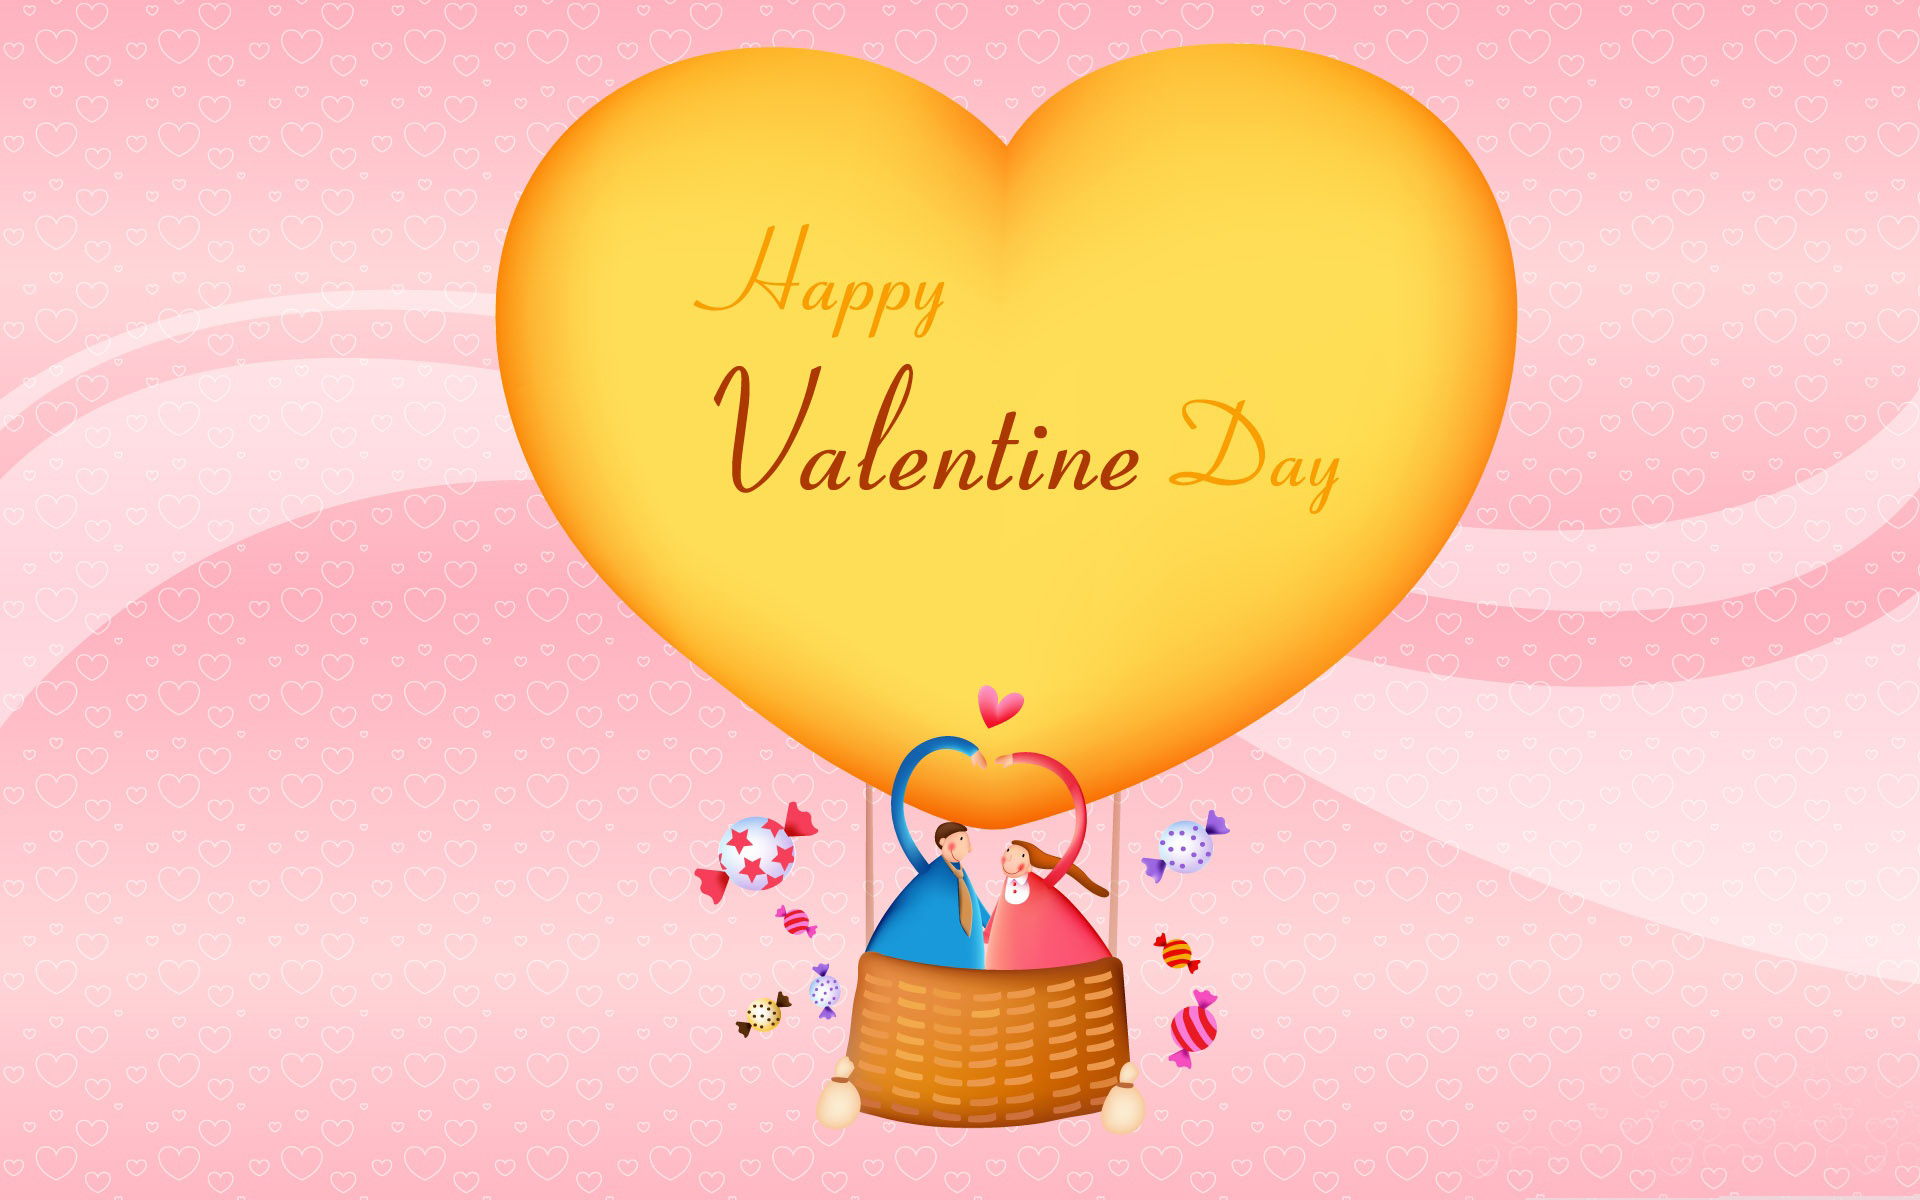 Happy Valentine Day Wallpapers Images Pics